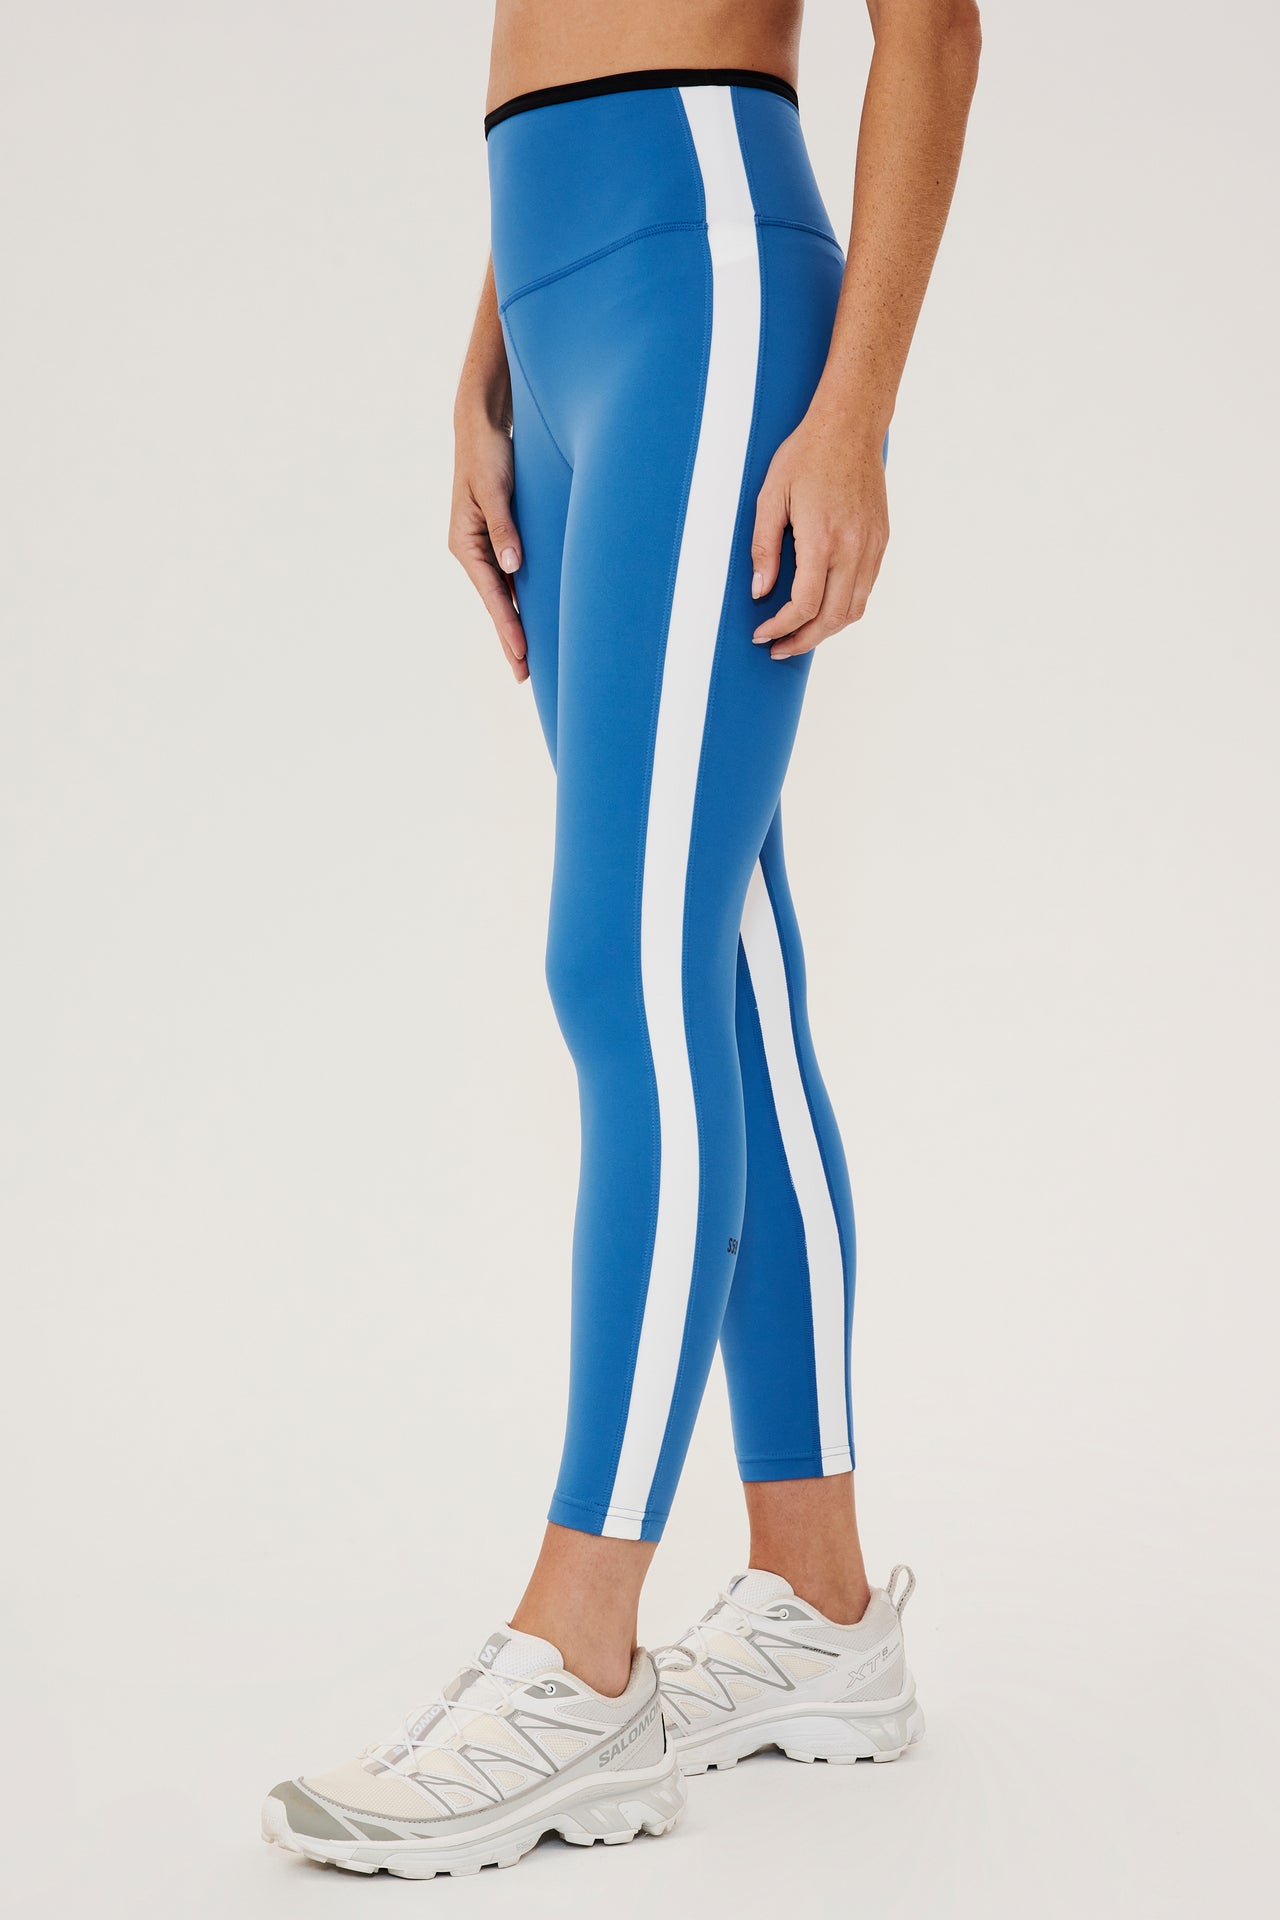 Front side view of woman wearing bright blue leggings with white side stripes and black waistband paired with white shoes